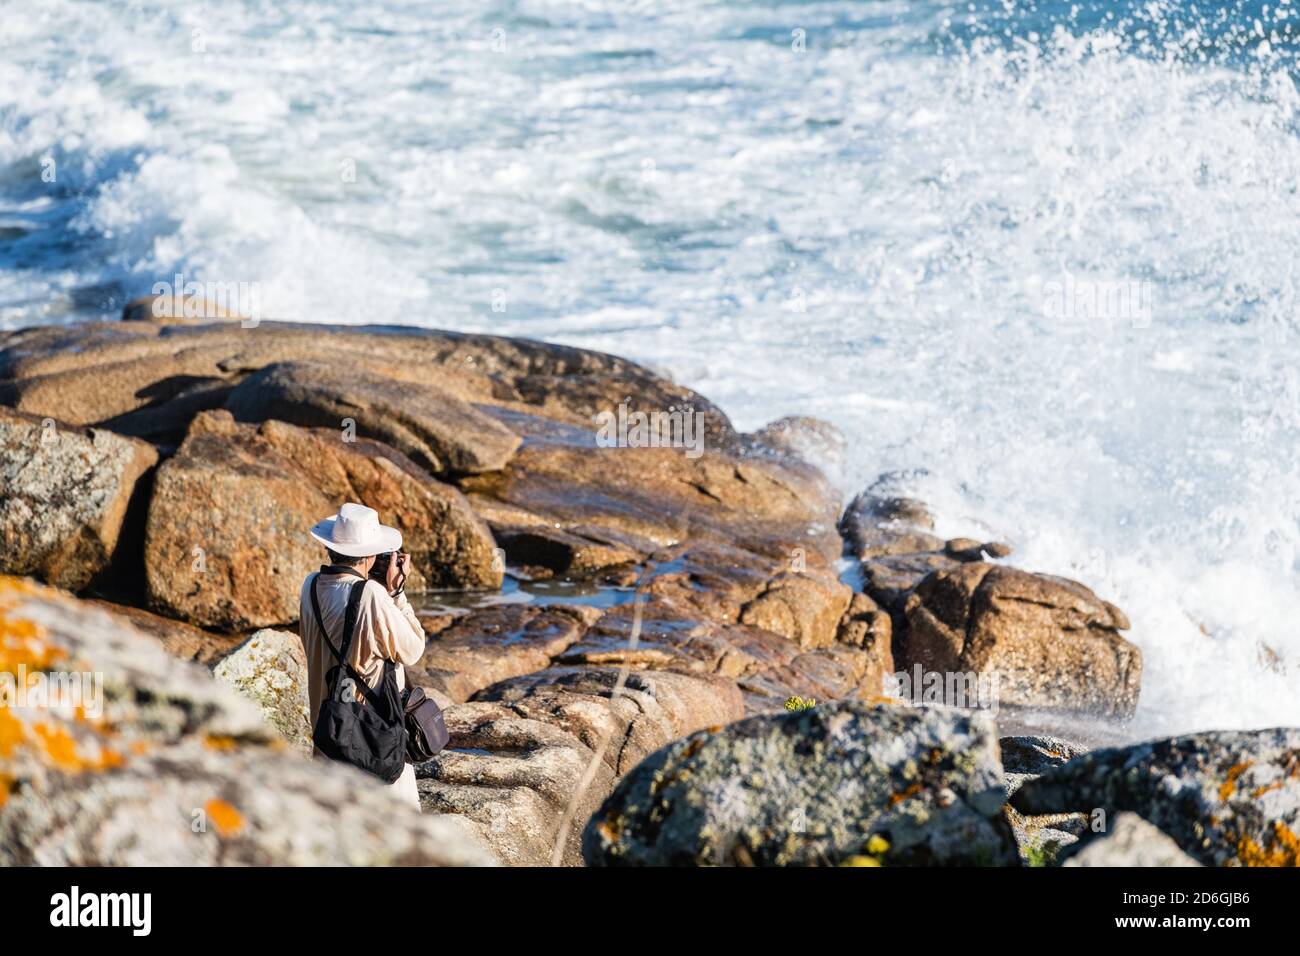 PORTONOVO, SPAIN - AUGUST 21, 2020: A well-equipped photographer takes pictures at sunset from the rocks in the Rias Baixas, Galicia. Stock Photo